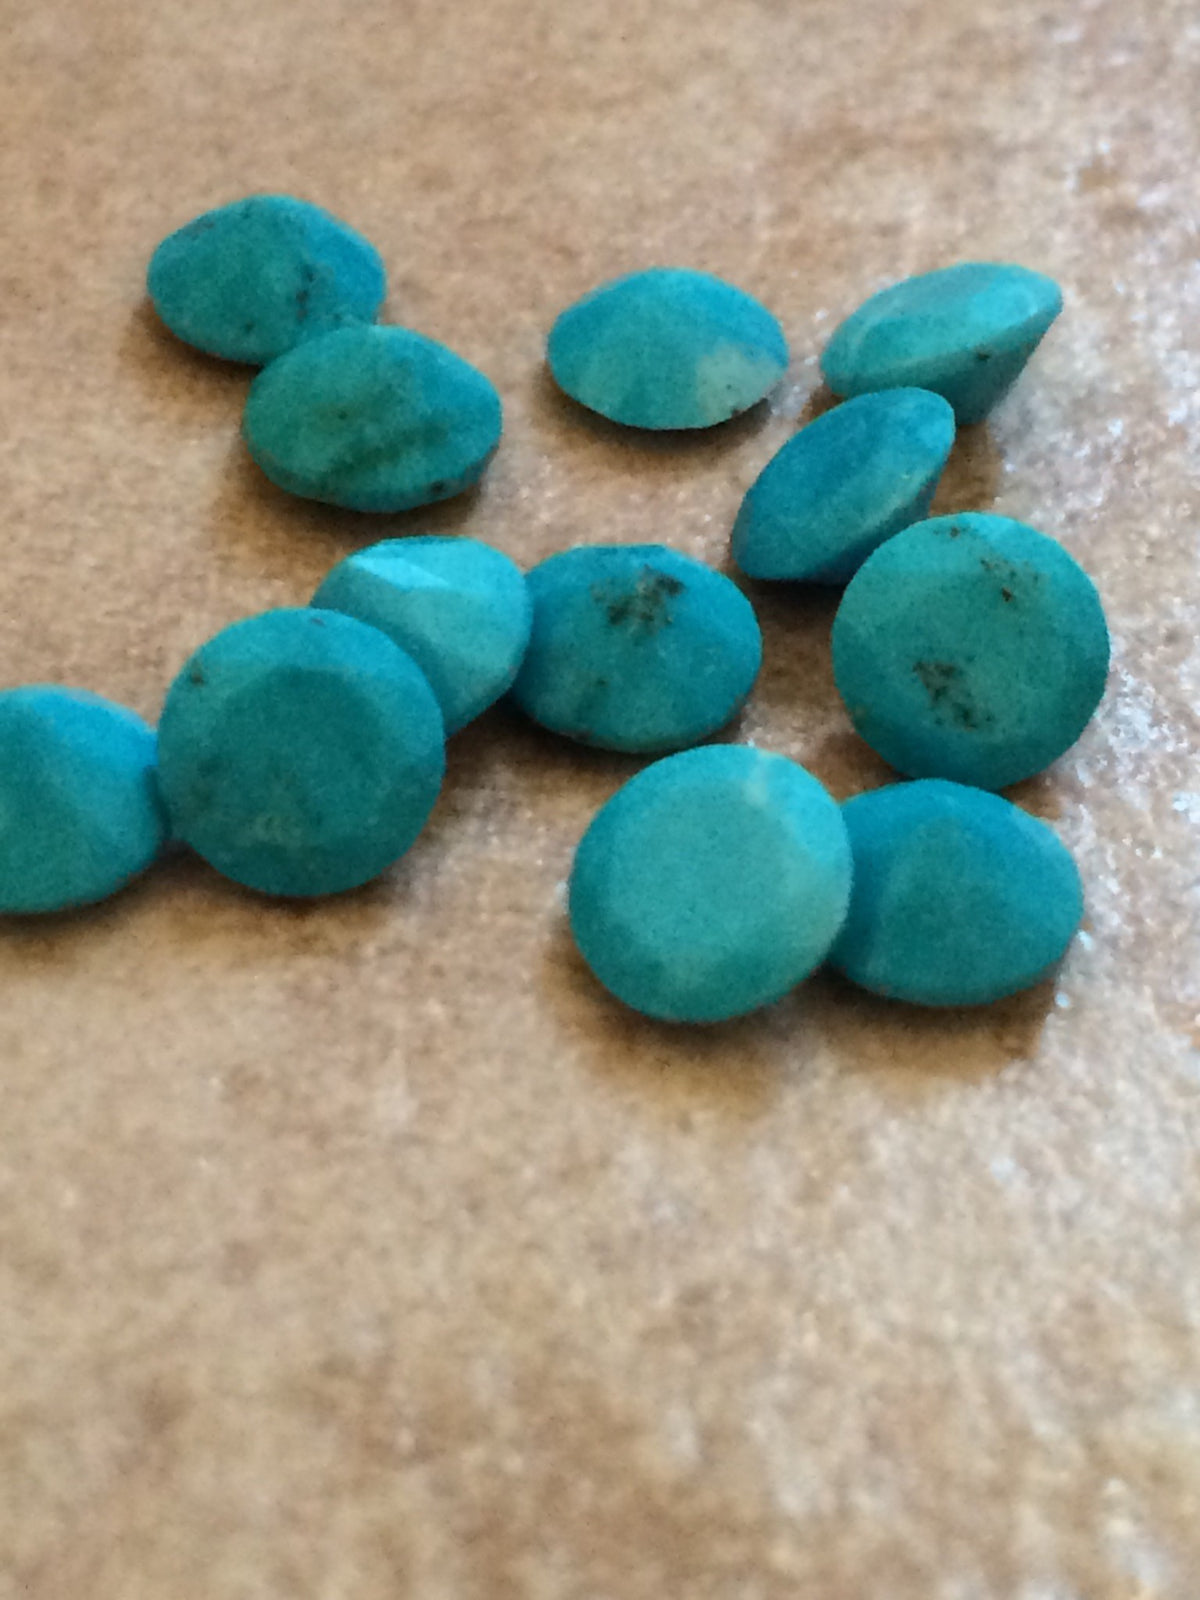 Turquoise (Natural) Faceted Cabochon Round 7mm (1pc)